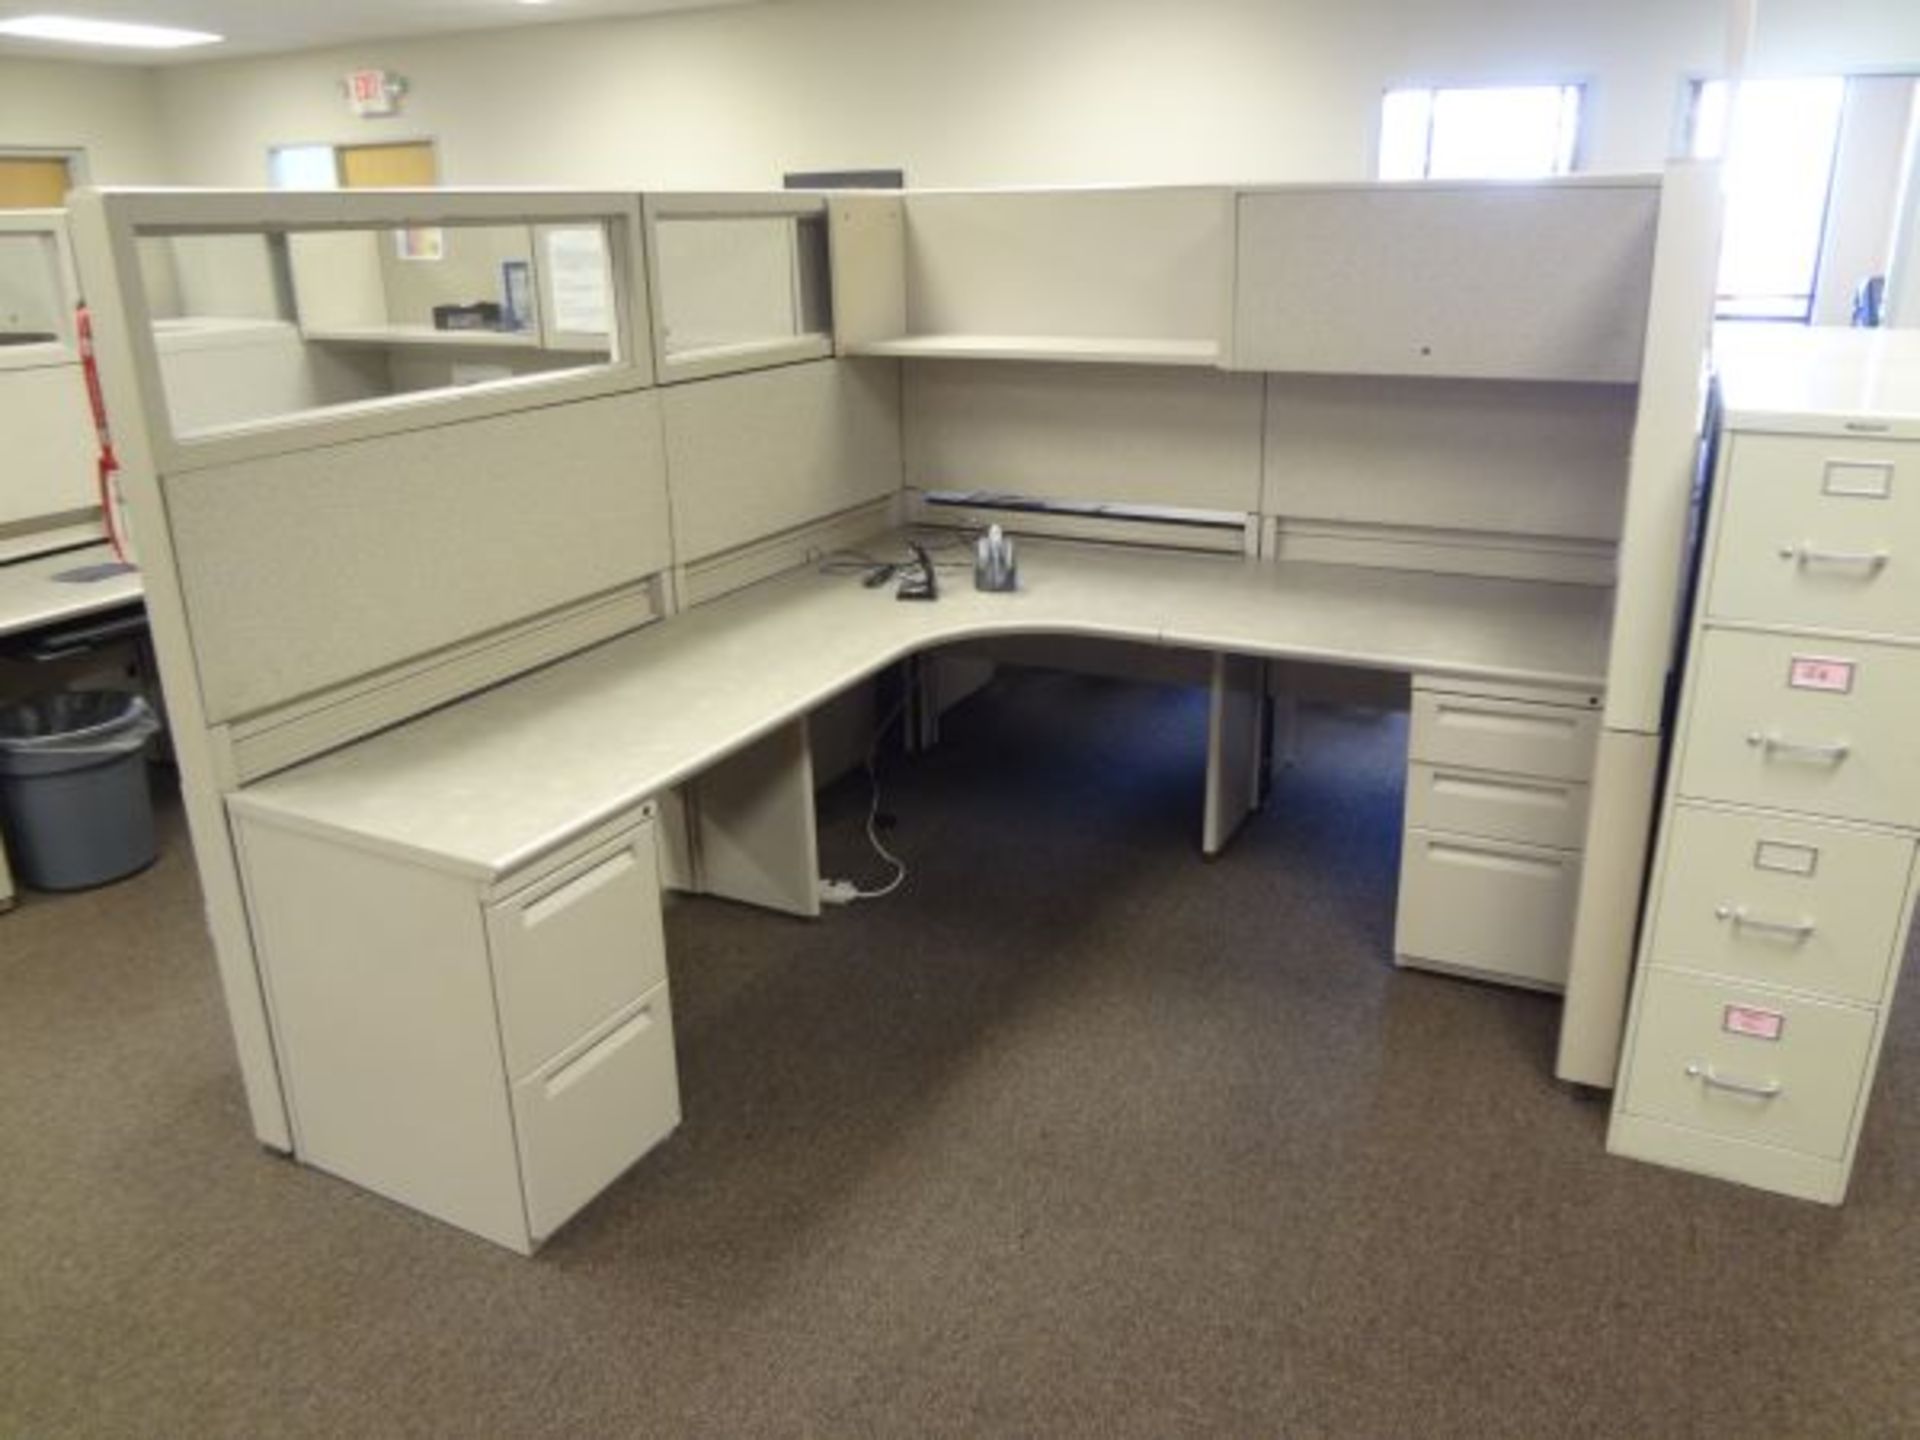 (LOT) 88" X 86" X 65" SIX-PERSON MARVELL MODULAR OFFICE INCLUDING (1) OVERHEAD CABINET, (1) OVERHEAD - Image 6 of 6